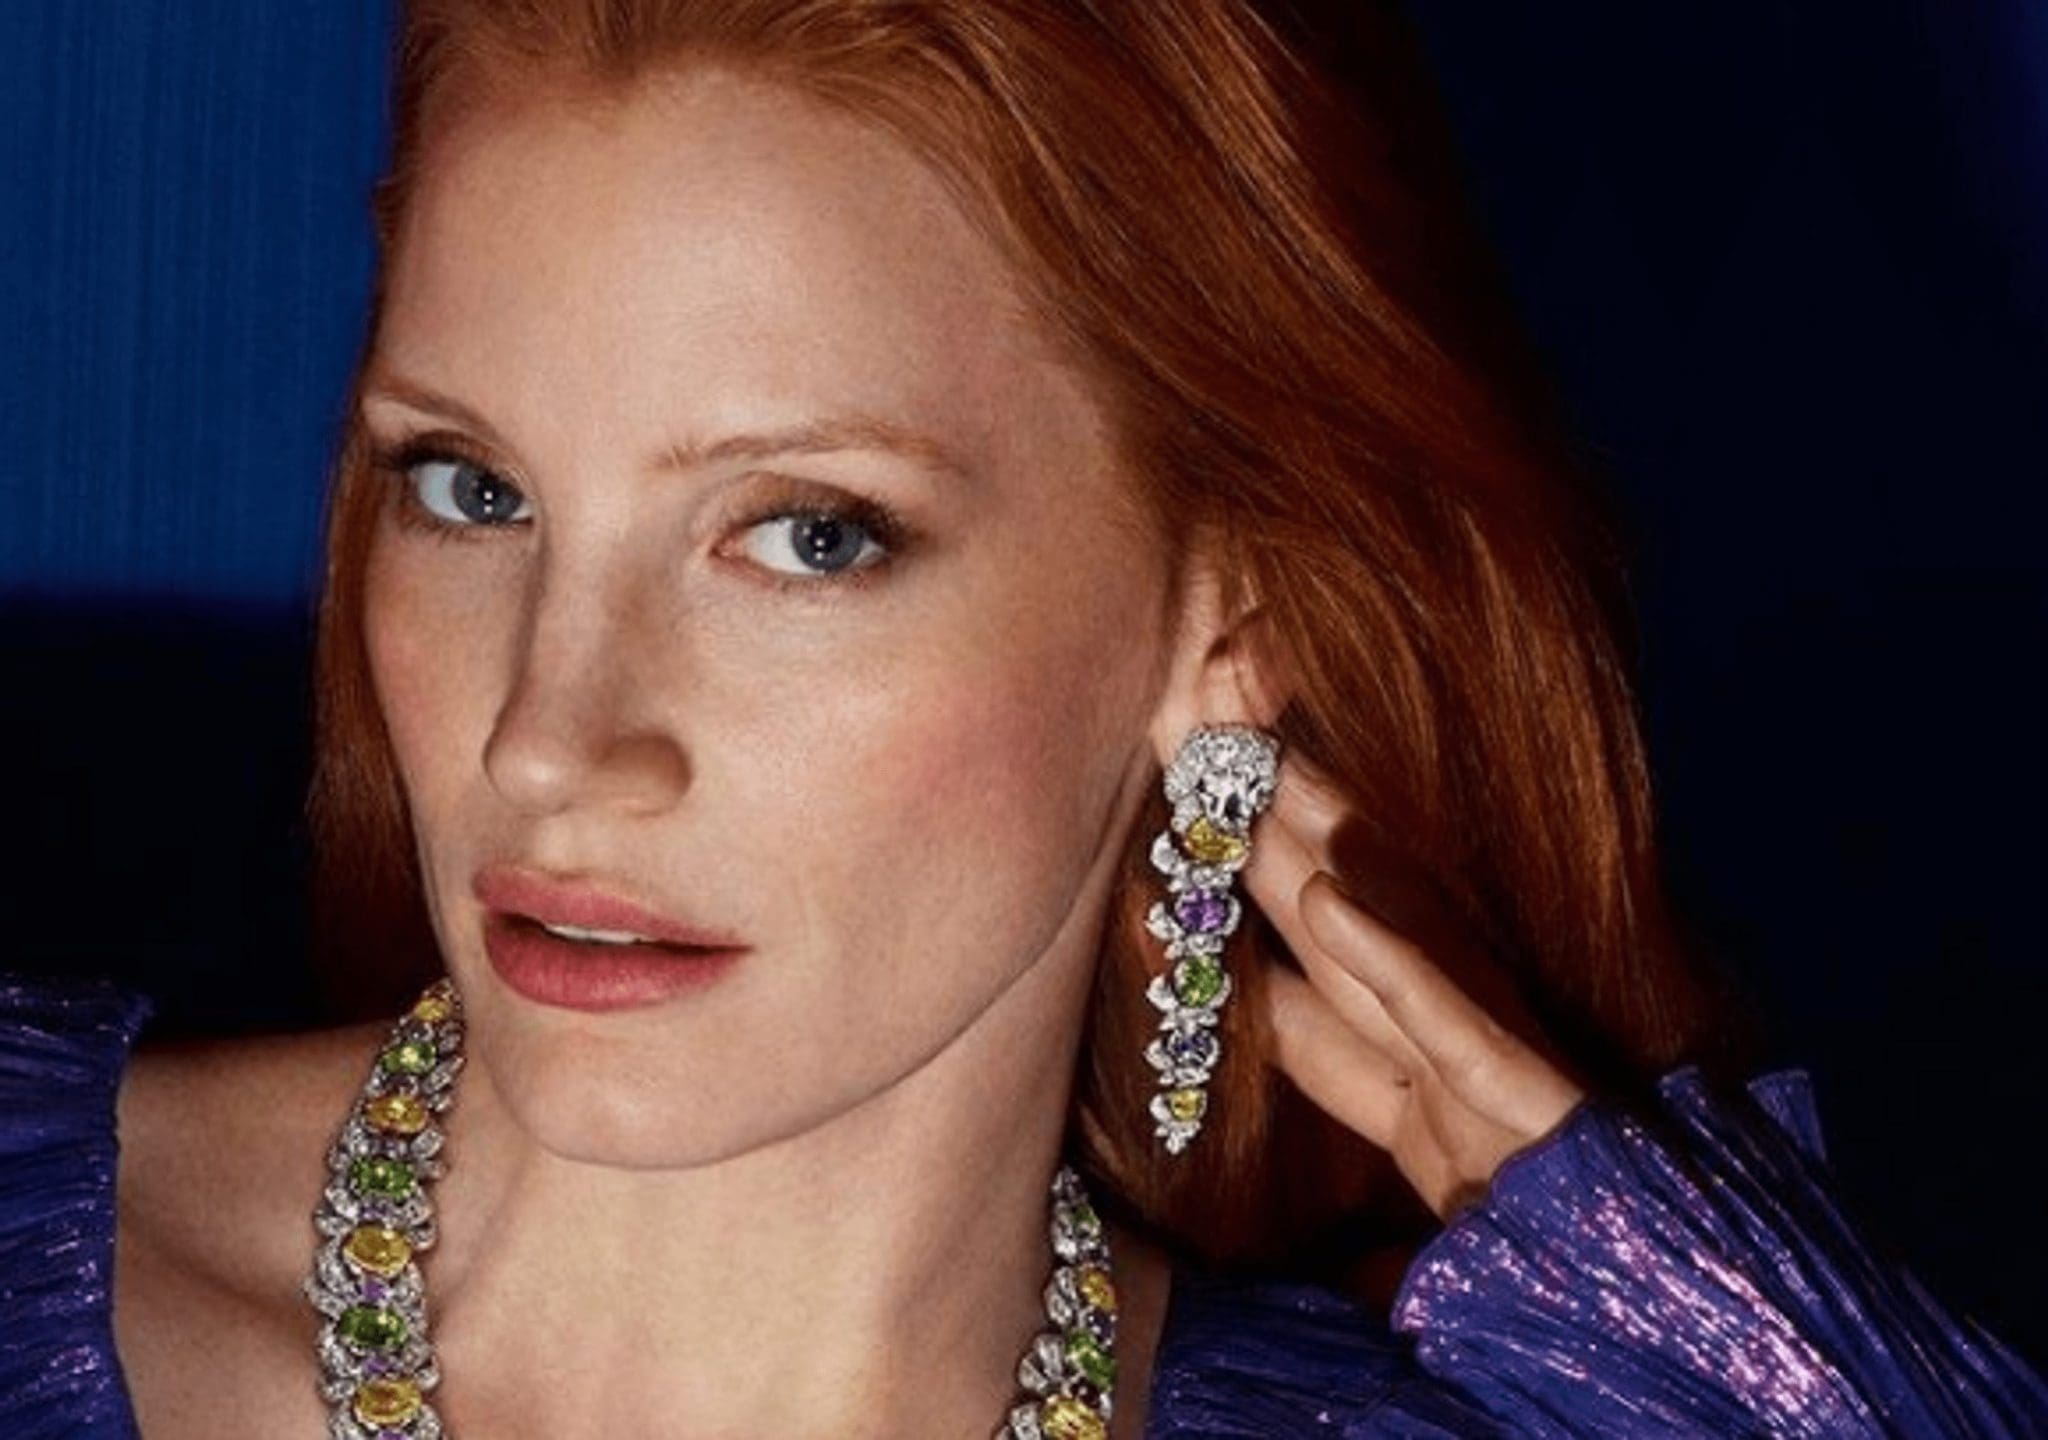 Jessica Chastain is the face of Gucci's Garden of Delights high jewelry collection